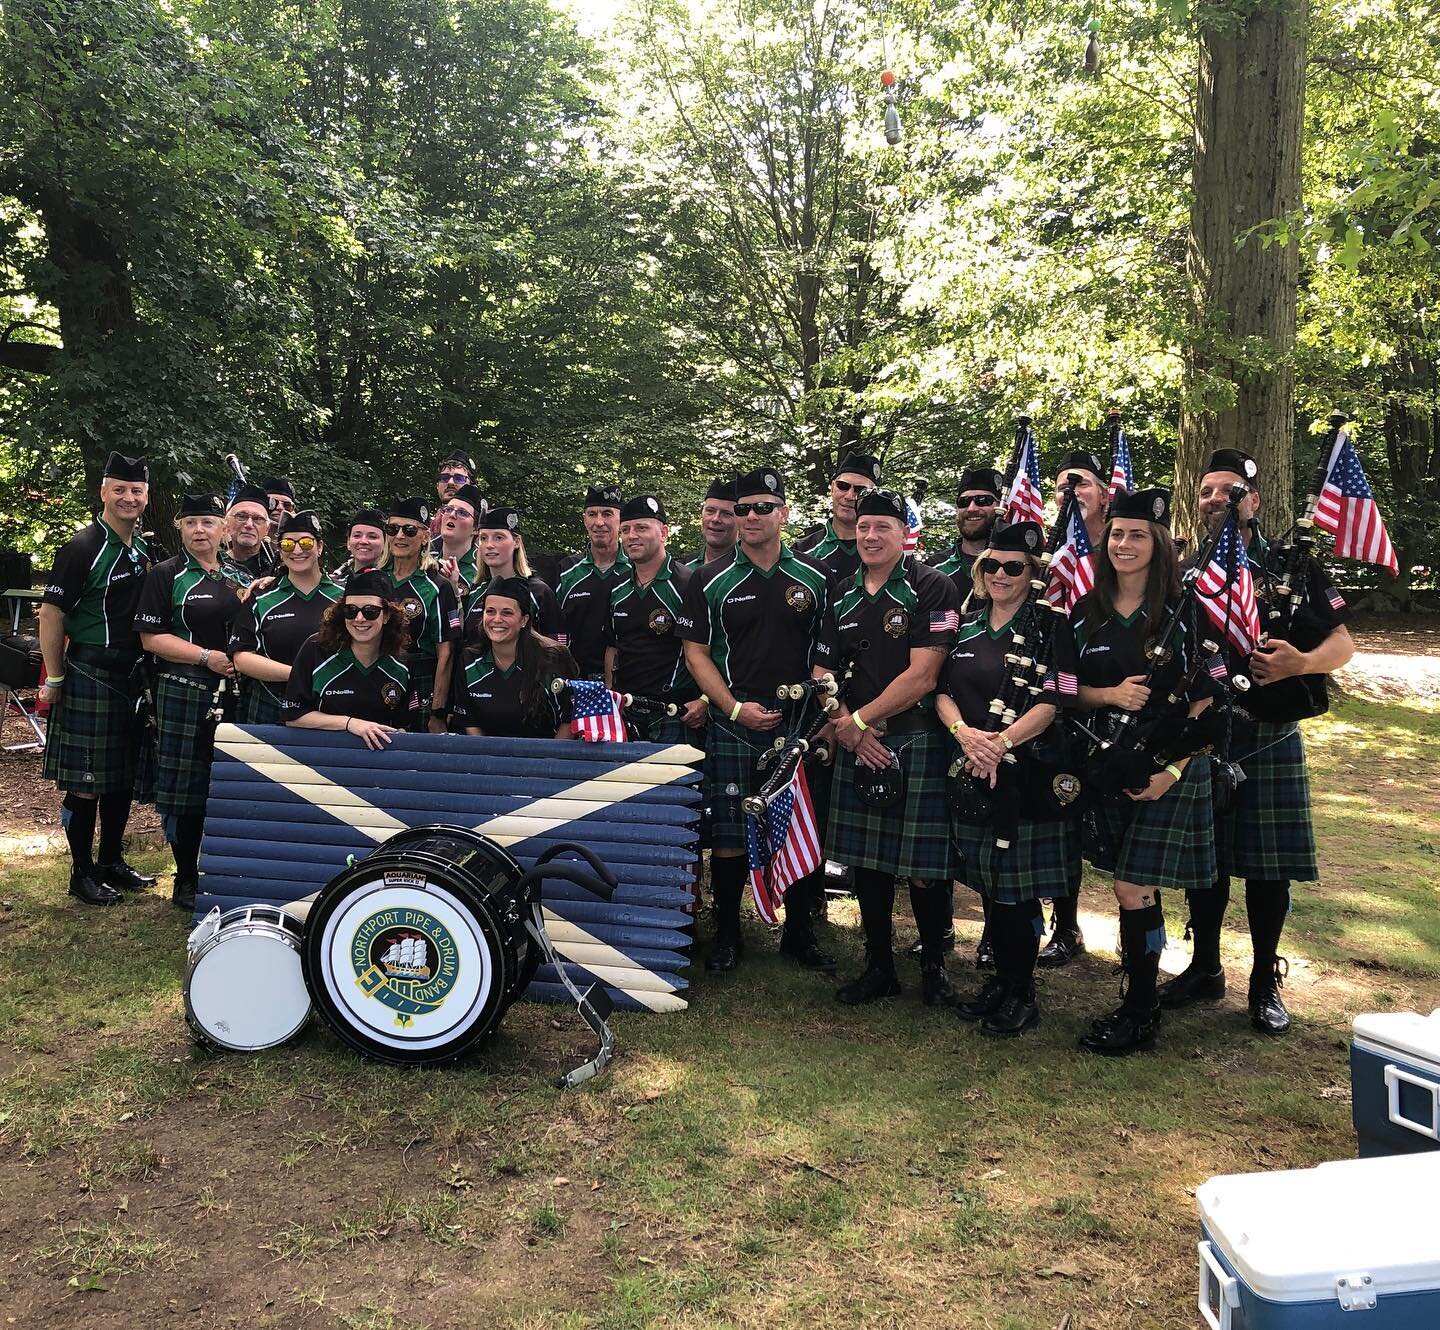 The Long Island Scottish Games are back! Come join us this Saturday @oldwestburygardens for all things Scottish - pipe and drum bands, traditional dancing, Highland games, handmade tartan goods, and lots of food! Hope to see you there! 

#bagpipes #h